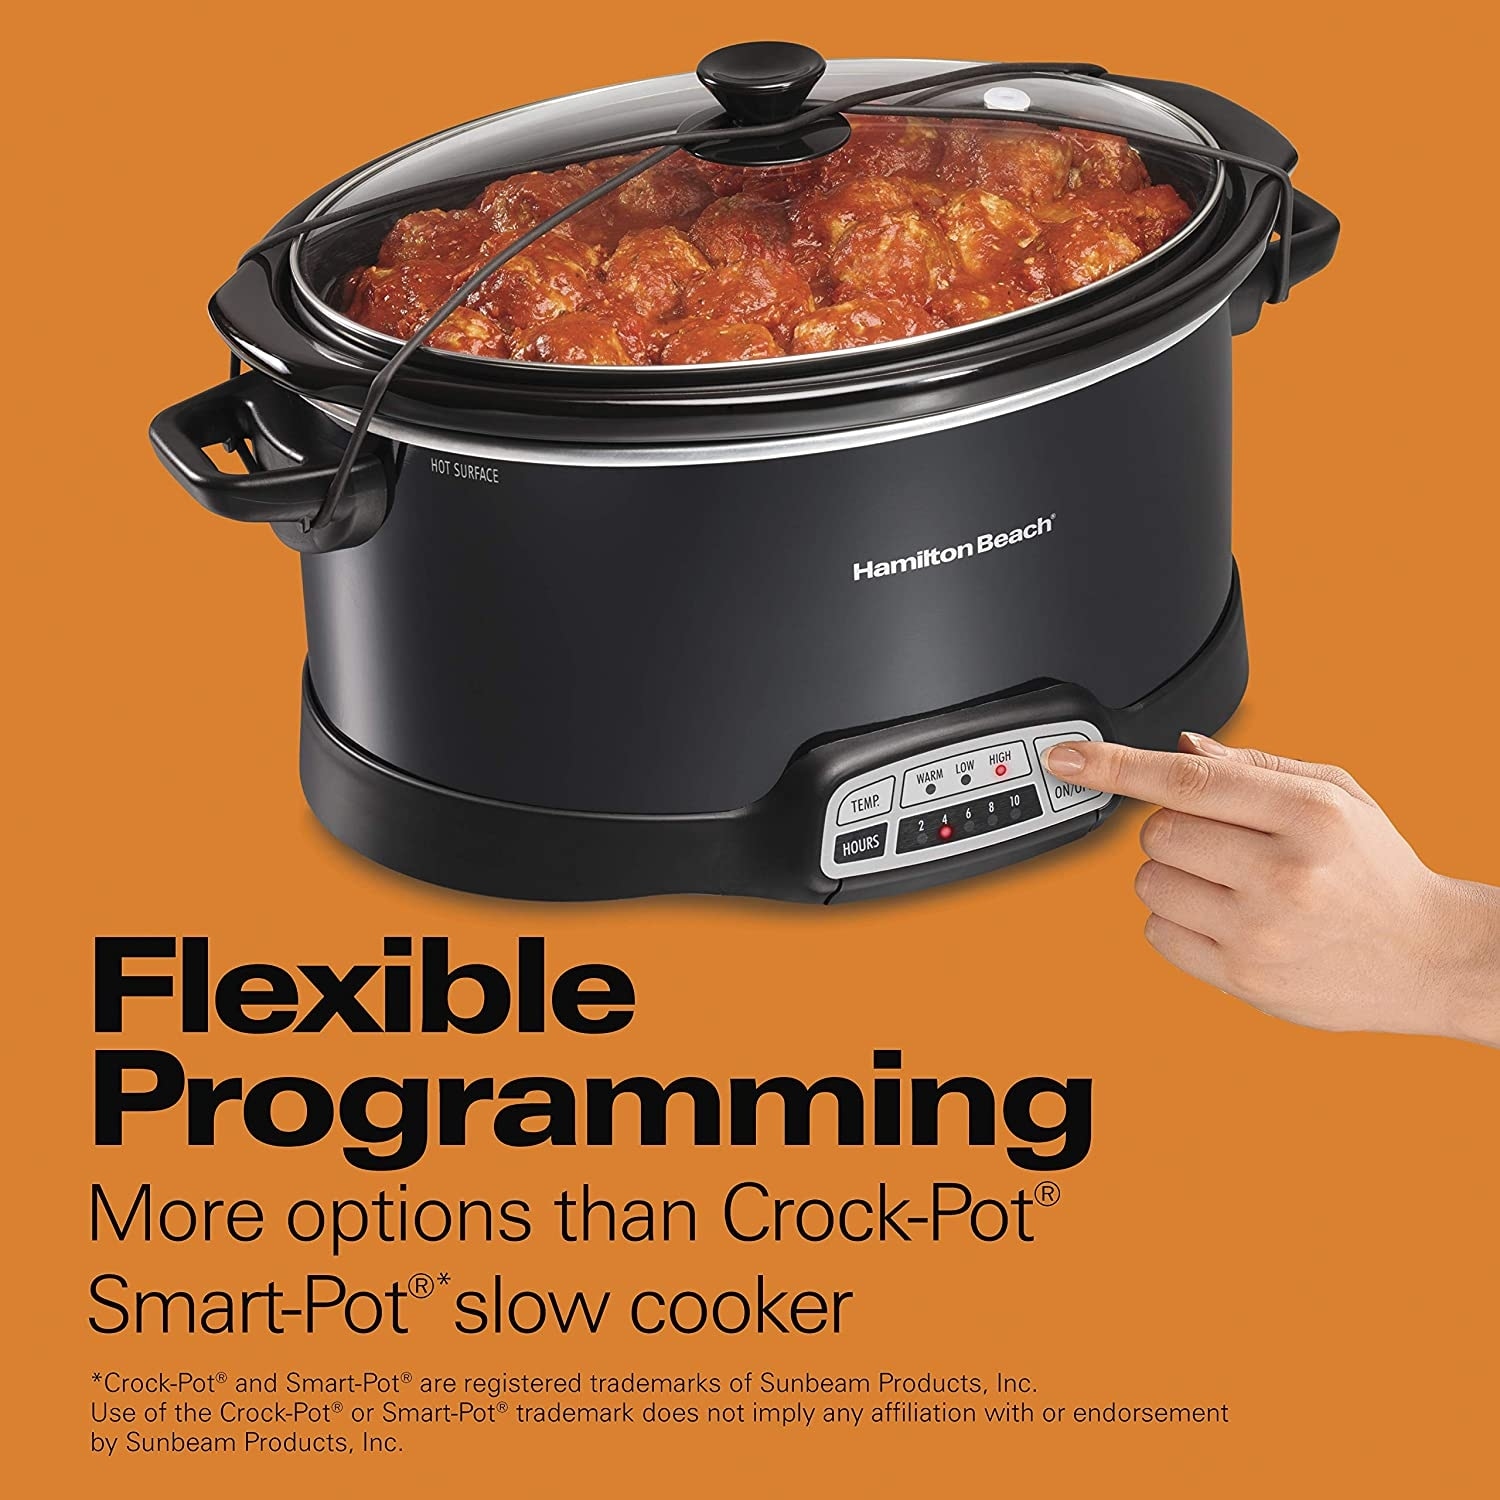 https://ak1.ostkcdn.com/images/products/is/images/direct/a94100a3916839c397fa66af0fd00bfcedfd31cb/Portable-7-Quart-Programmable-Slow-Cooker-with-Three-Temperature-Settings%2C-Lid-Latch-Strap-for-Easy-Travel.jpg